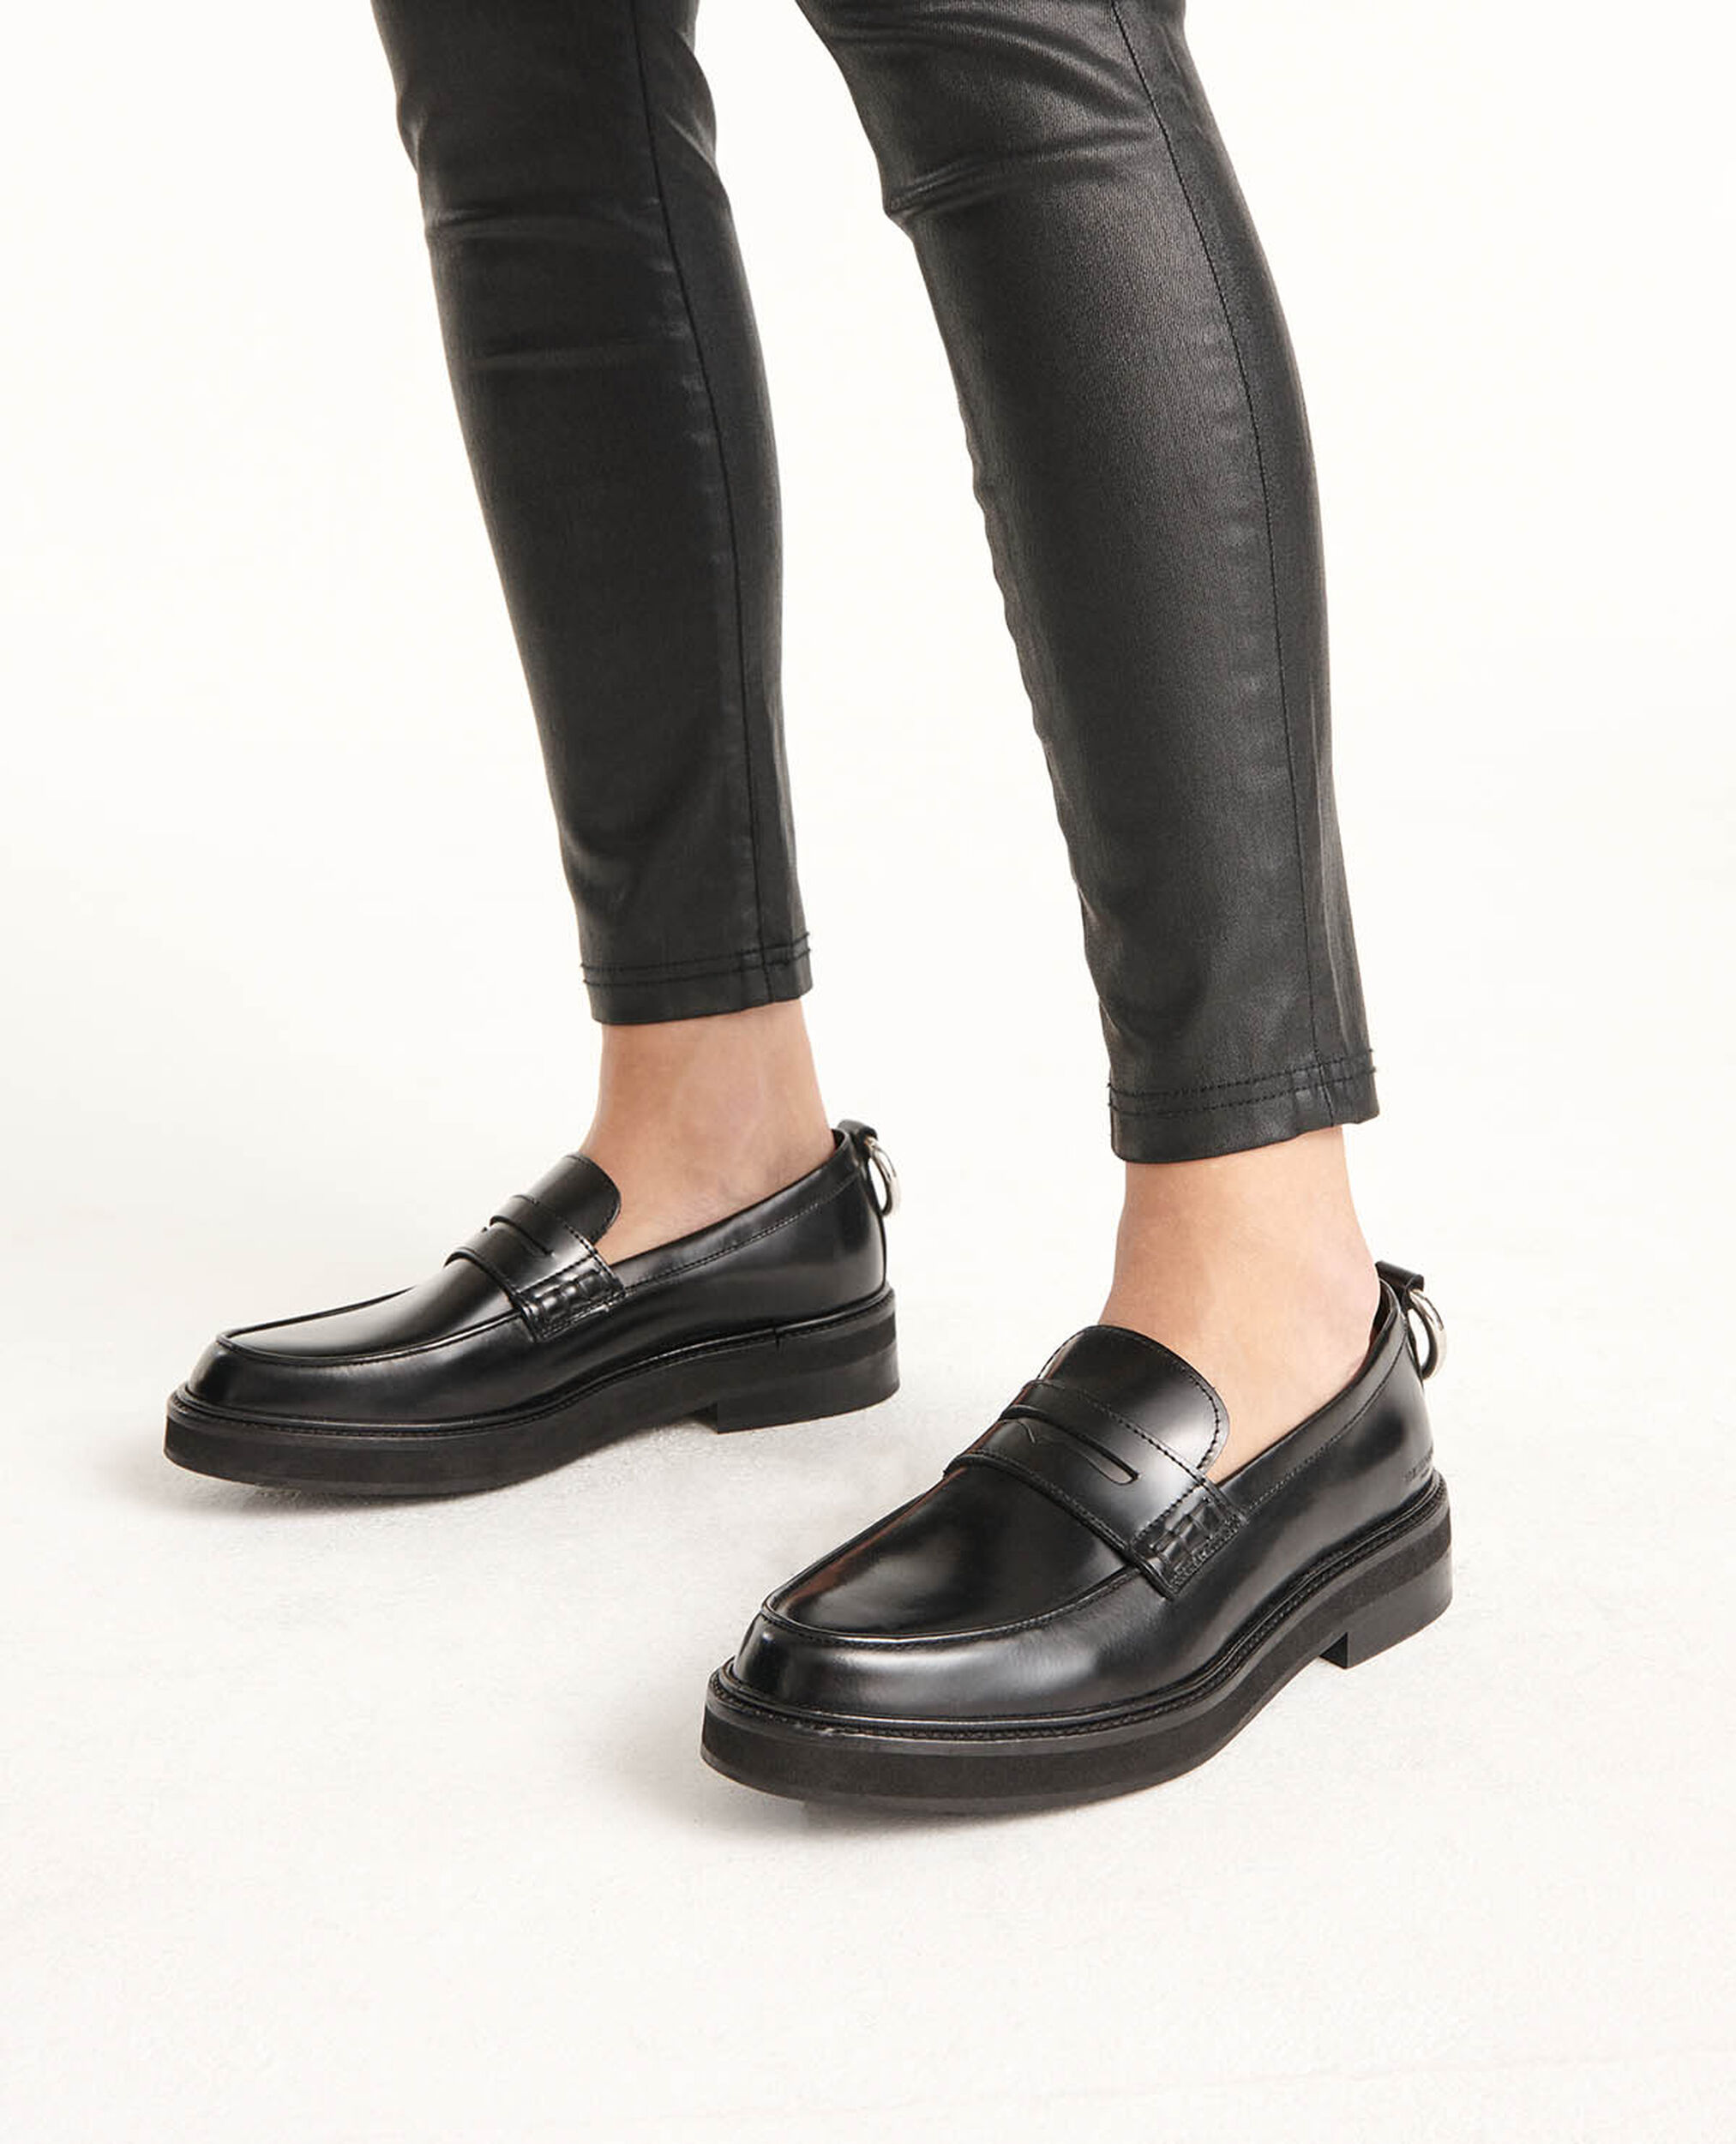 Chunky glossy black leather moccasins, BLACK, hi-res image number null